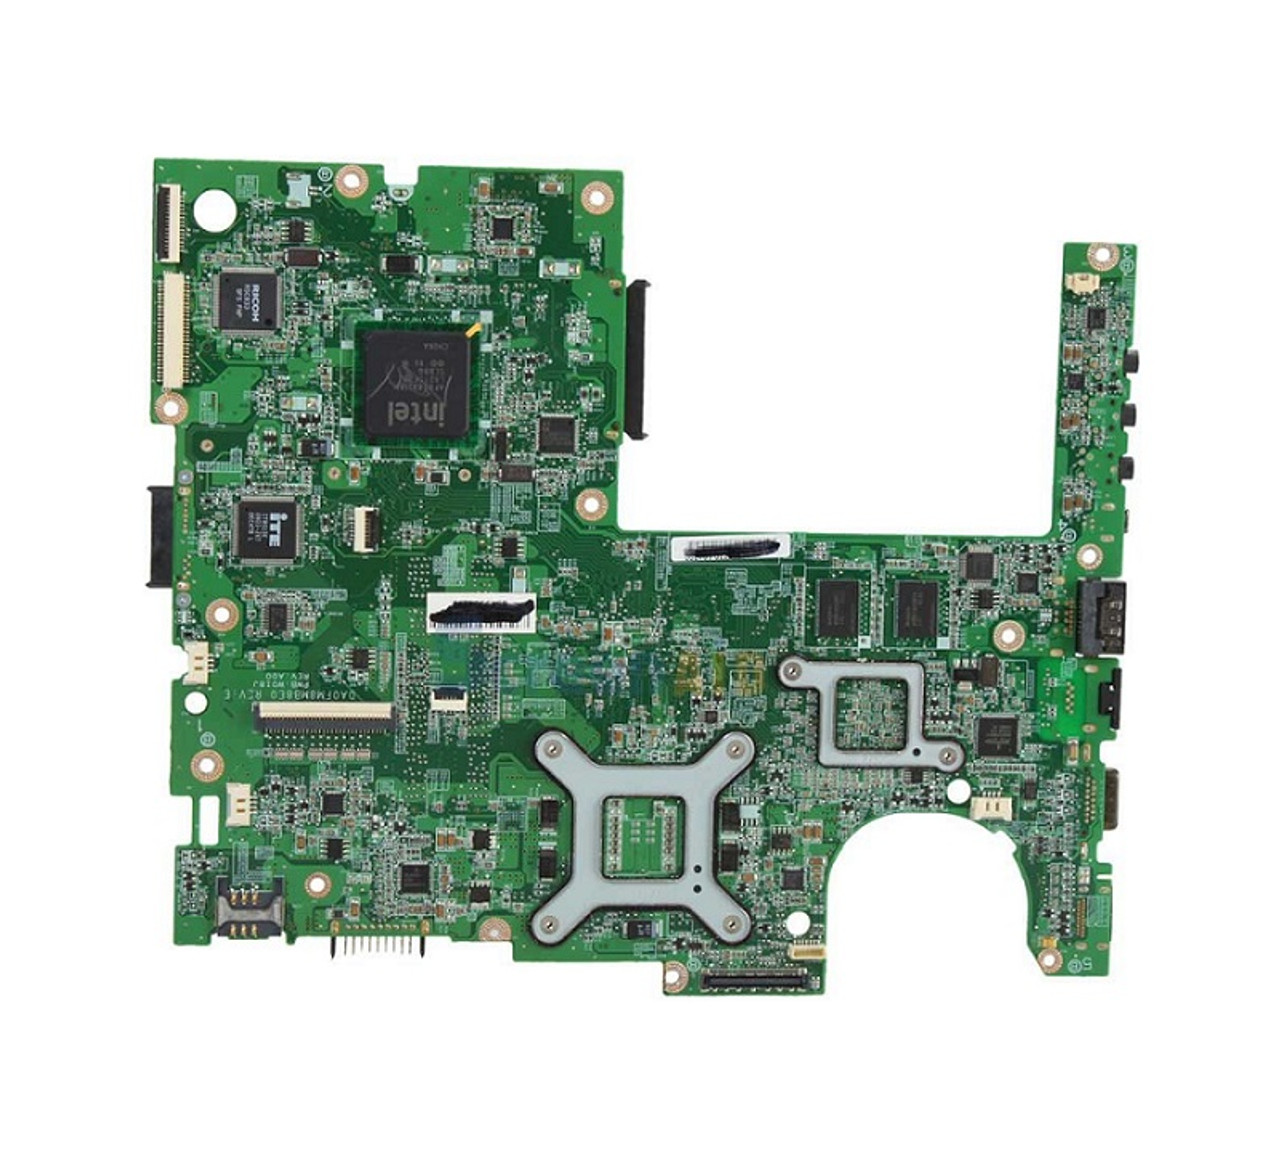 A1703240A - Sony Vaio VGN-SR Intel Laptop Motheboard S478 (Refurbished)